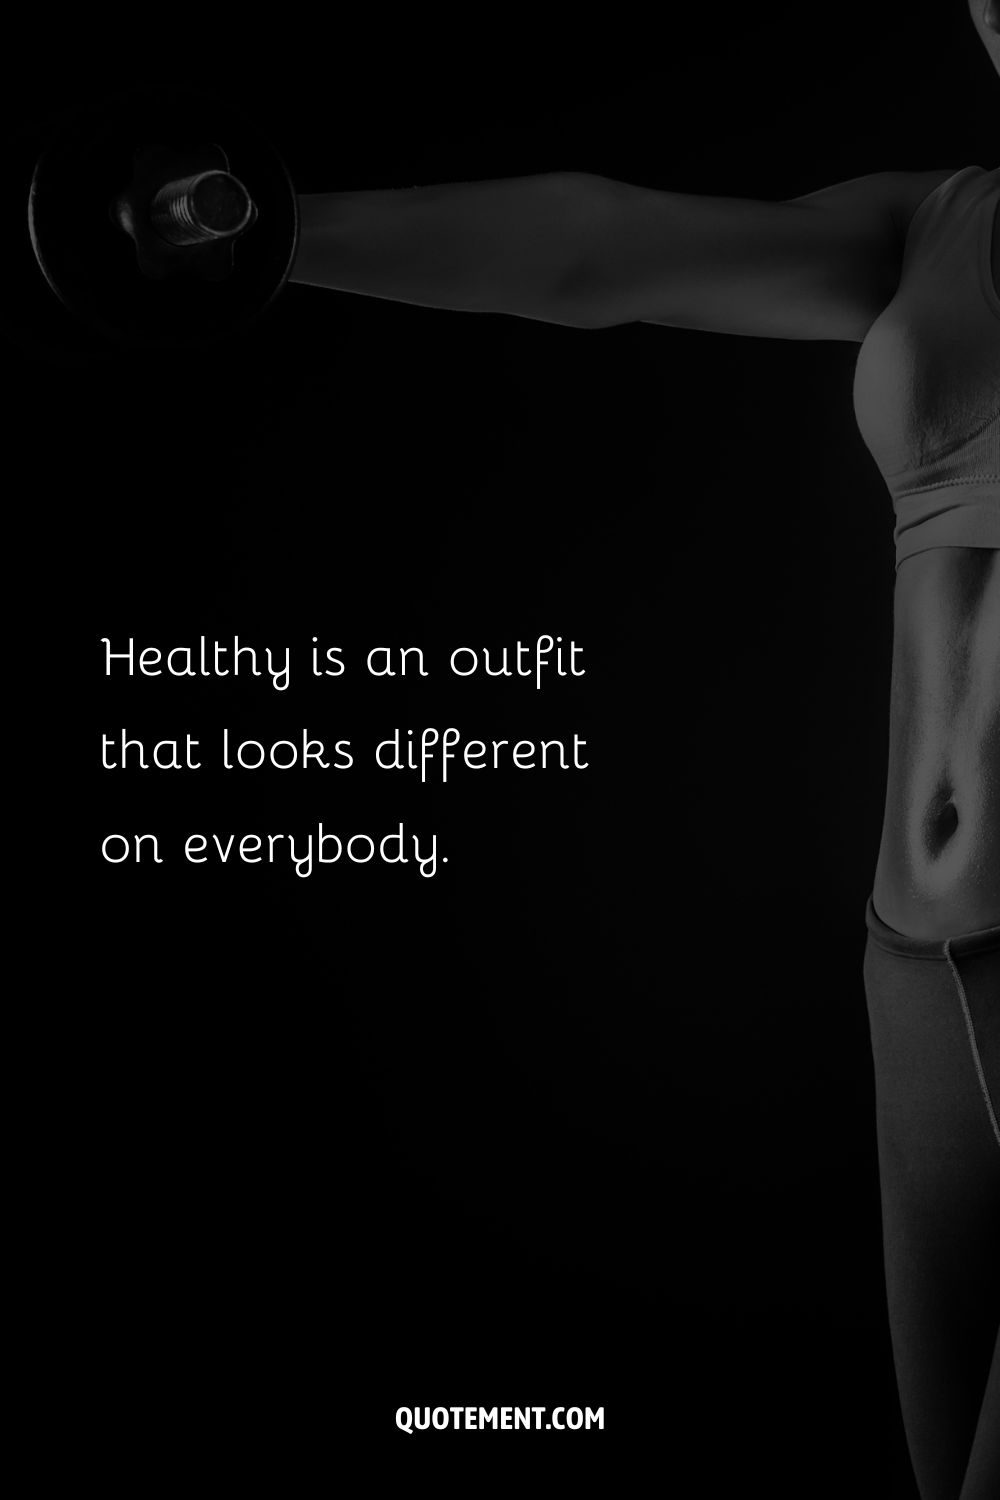 image of a girl lifting representing workout quote for health